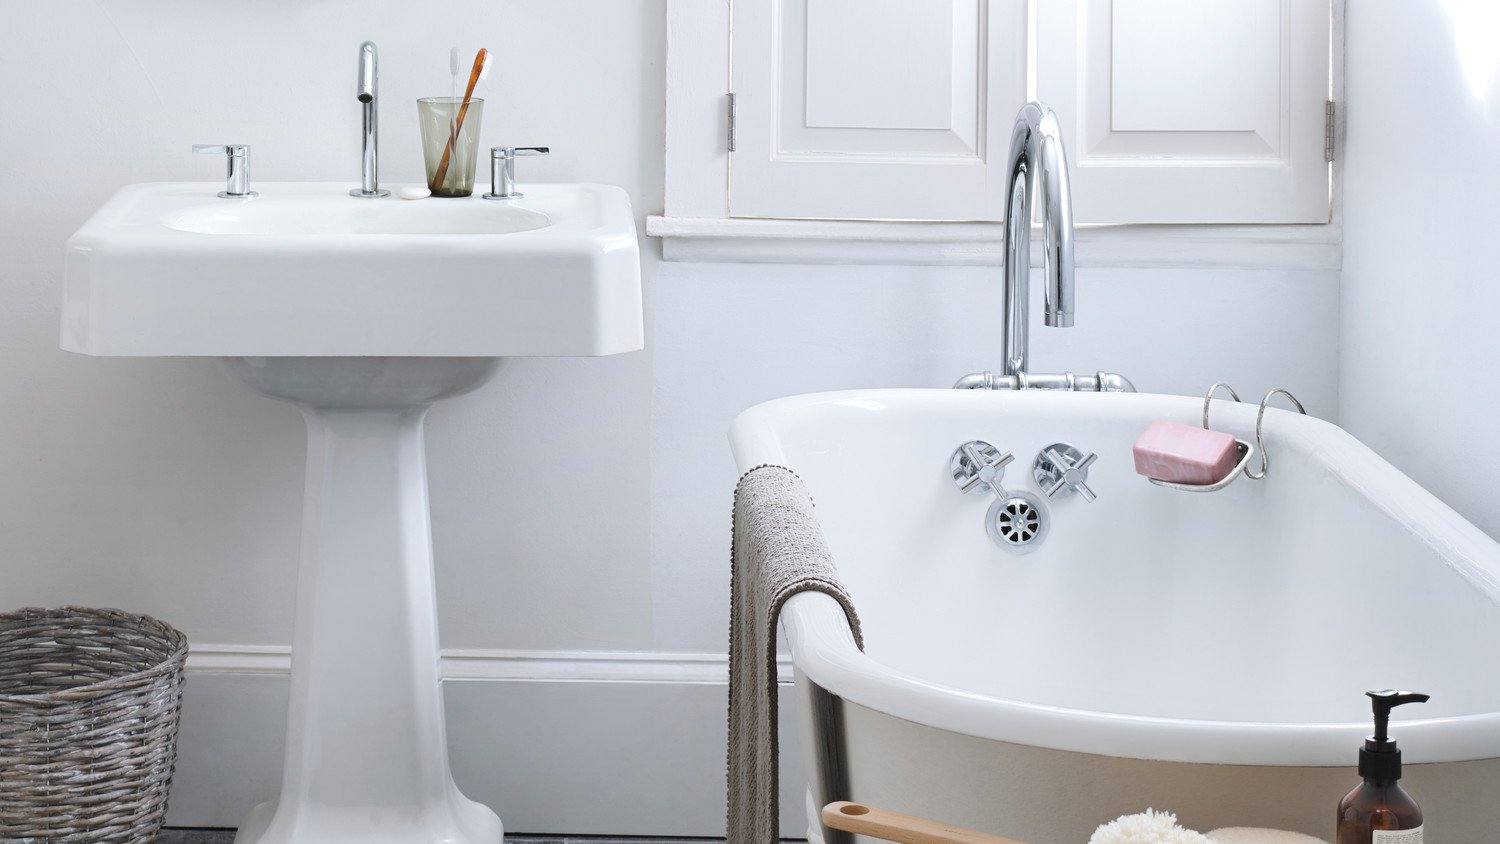 ABC's of Clean: How to Clean Your Bathroom, Blog